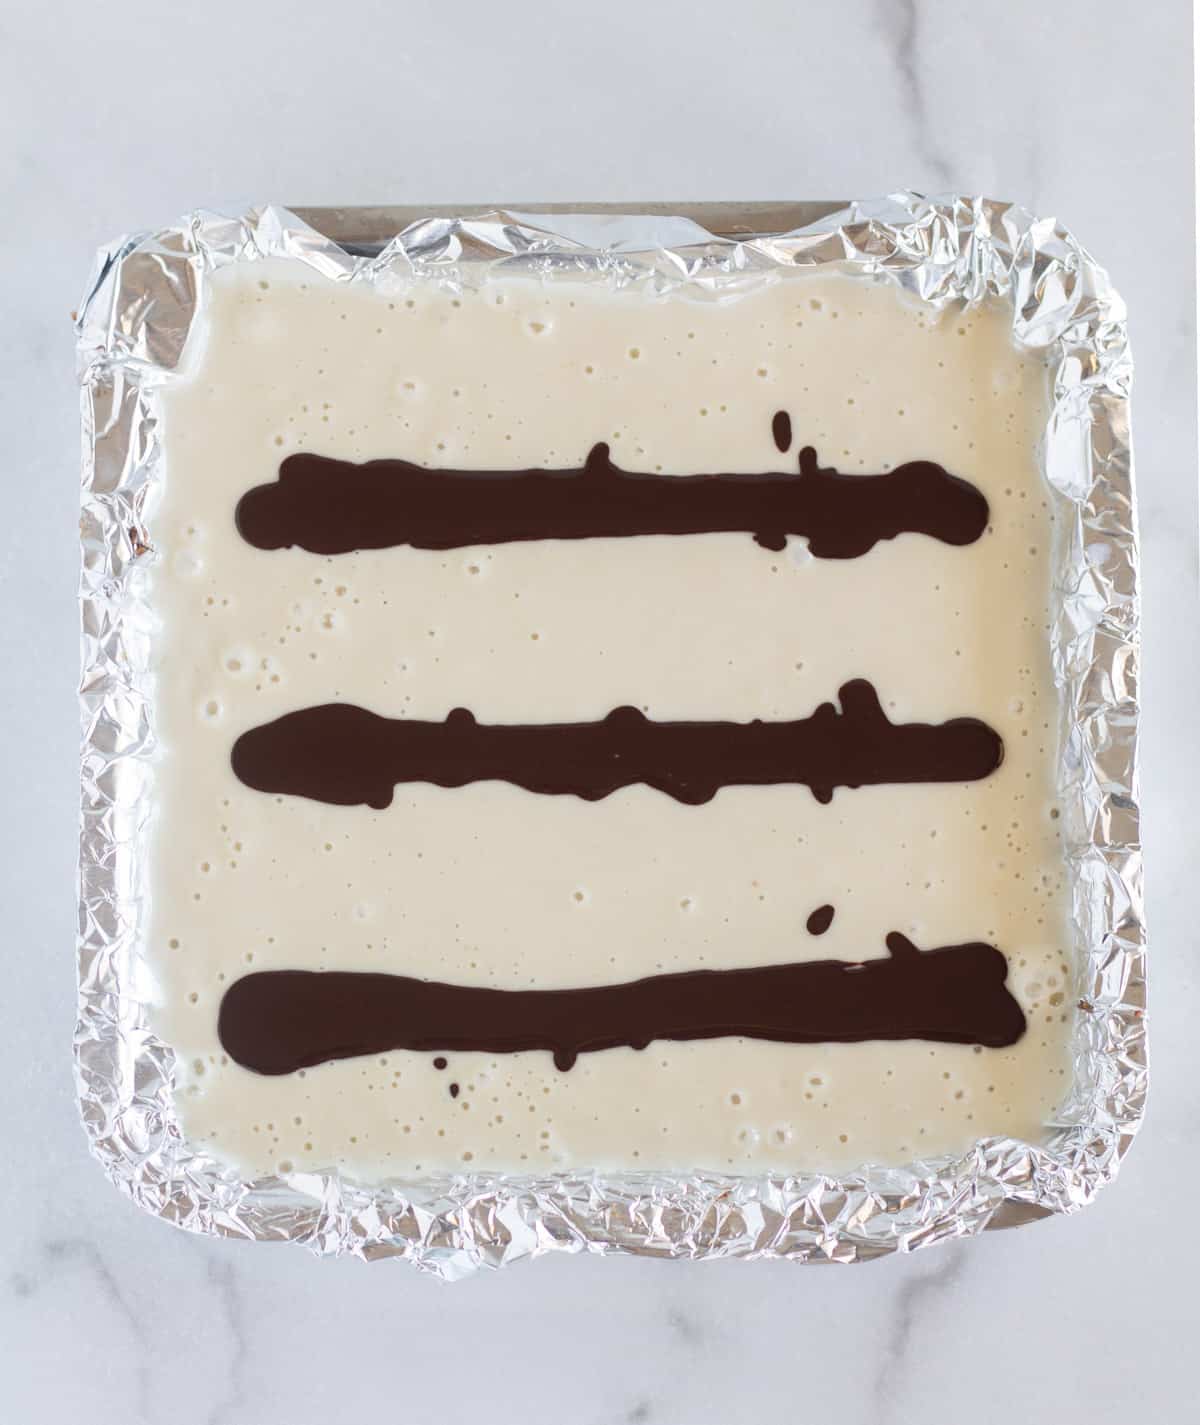 3 lines of chocolate drizzled on top of the cheesecake